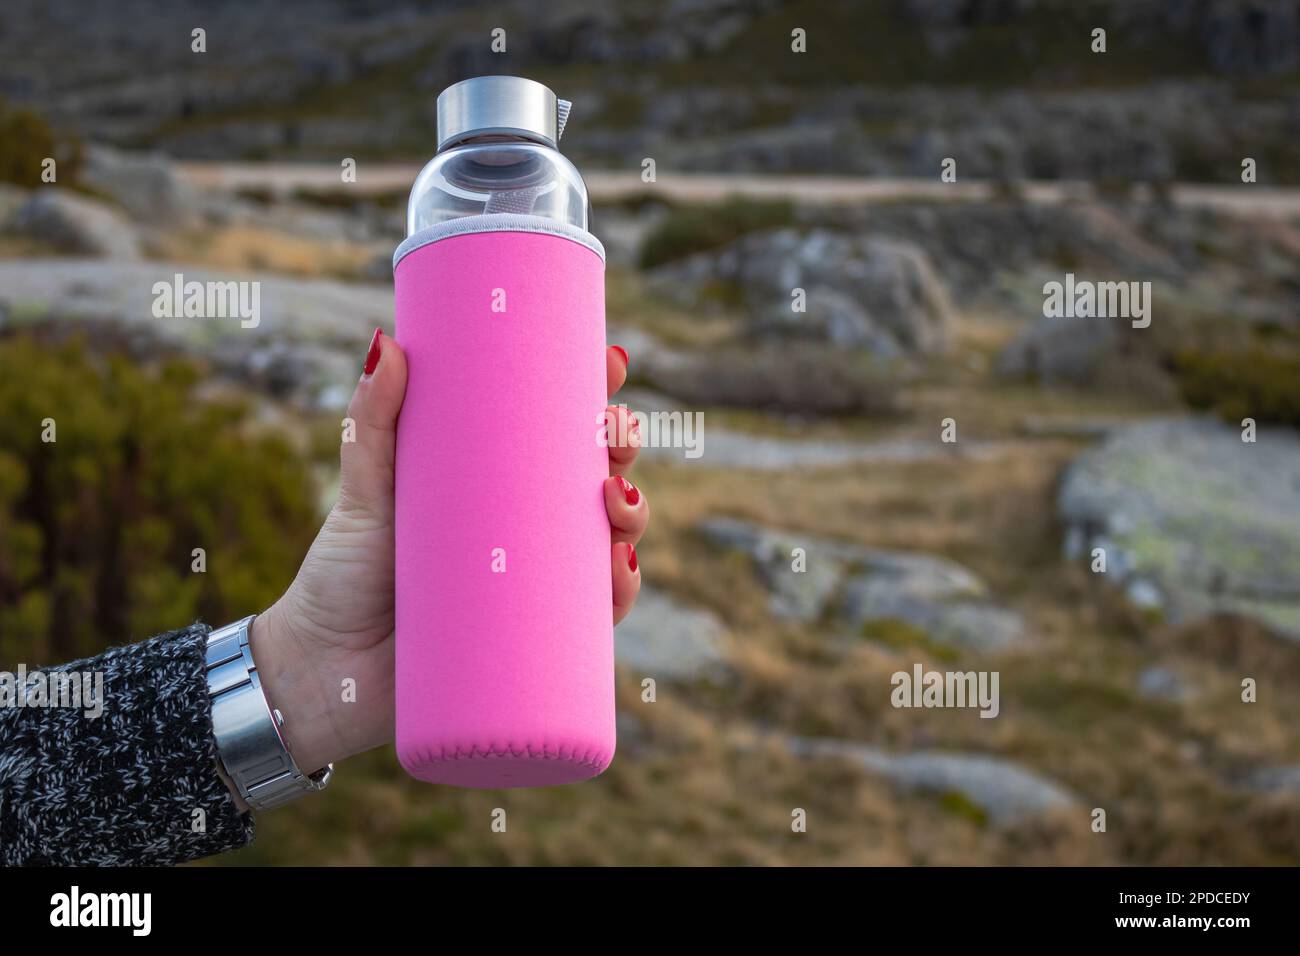 Refreshing hydration with a touch of sweetness: Glass water bottle with pink sleeve Stock Photo